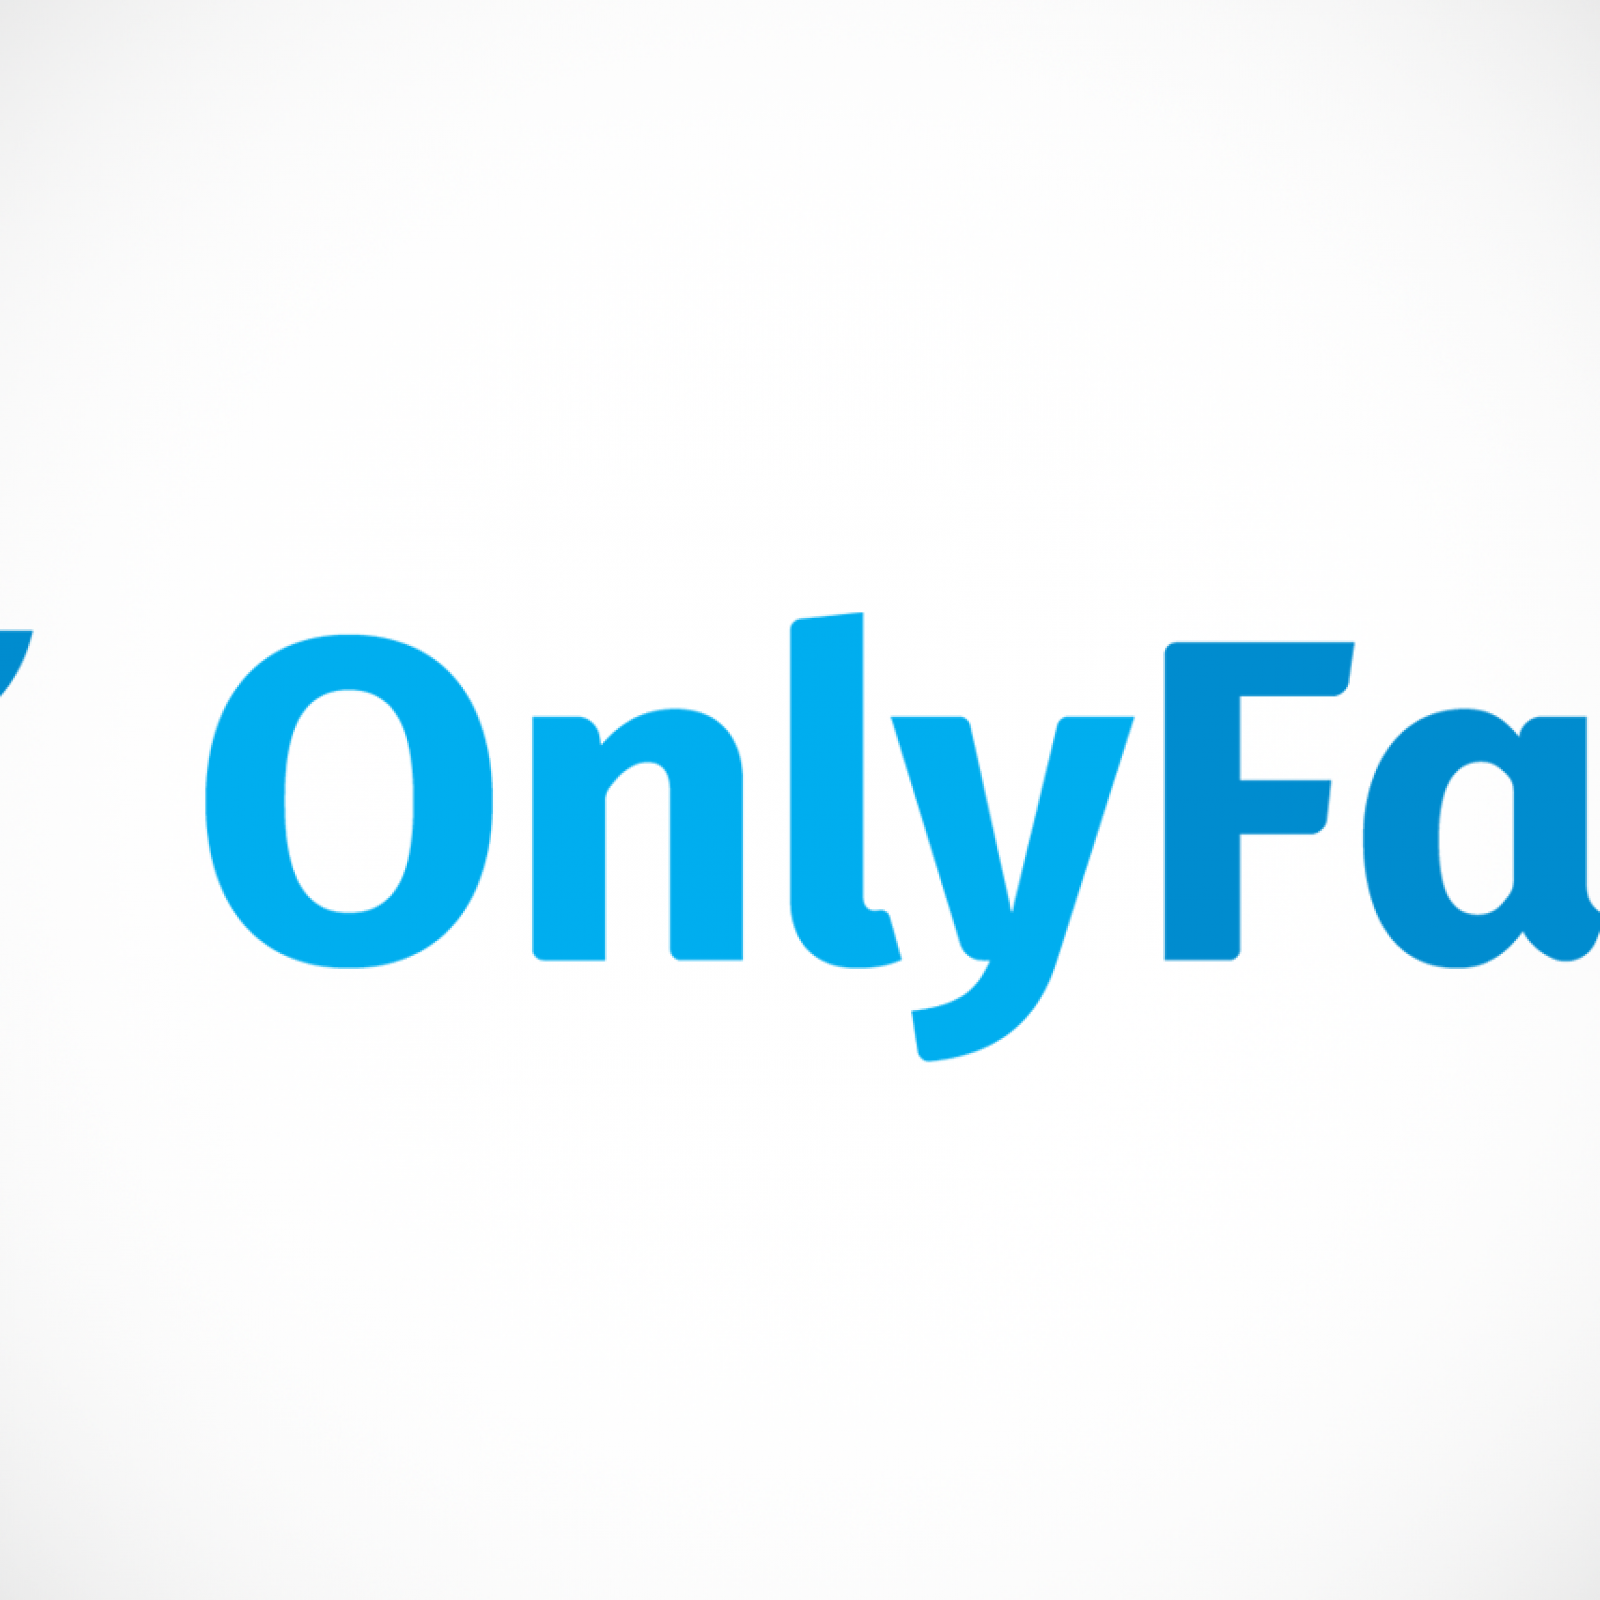 Only fans png